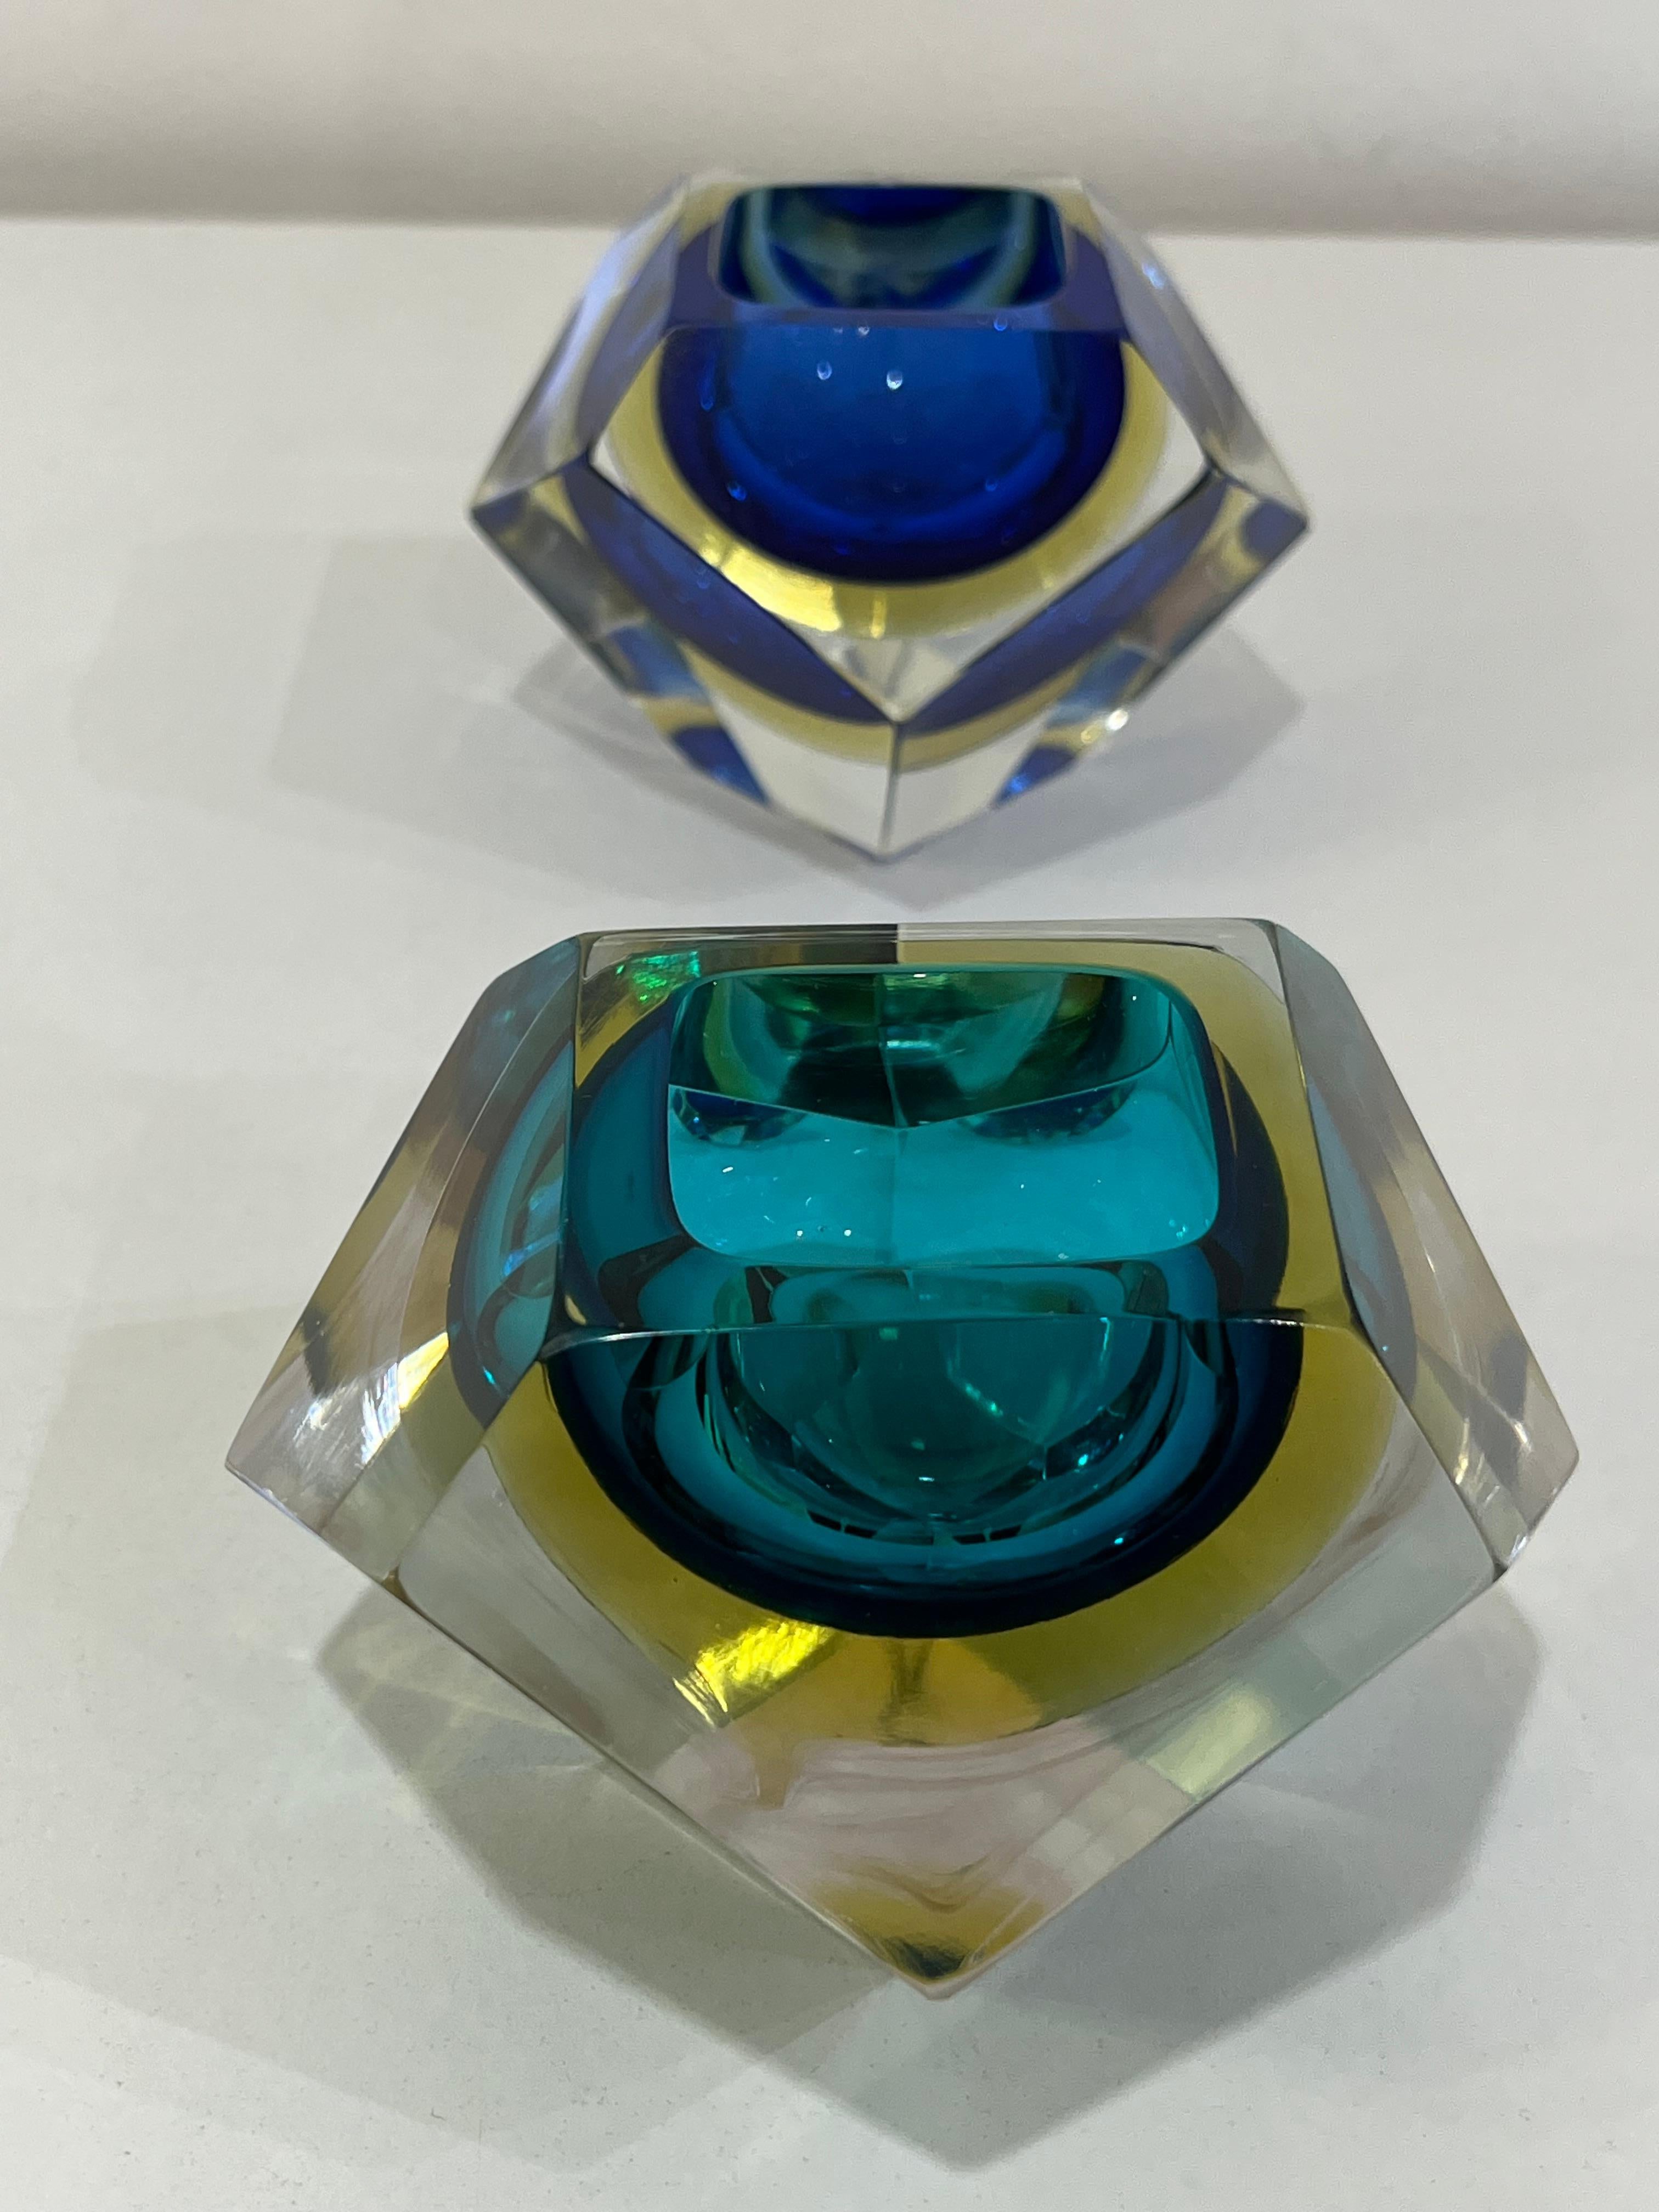 Set of 2 of colorful Murano glass ashtrays Mid-Century Italian design 1960s
Good condition, very small scratches and defects.